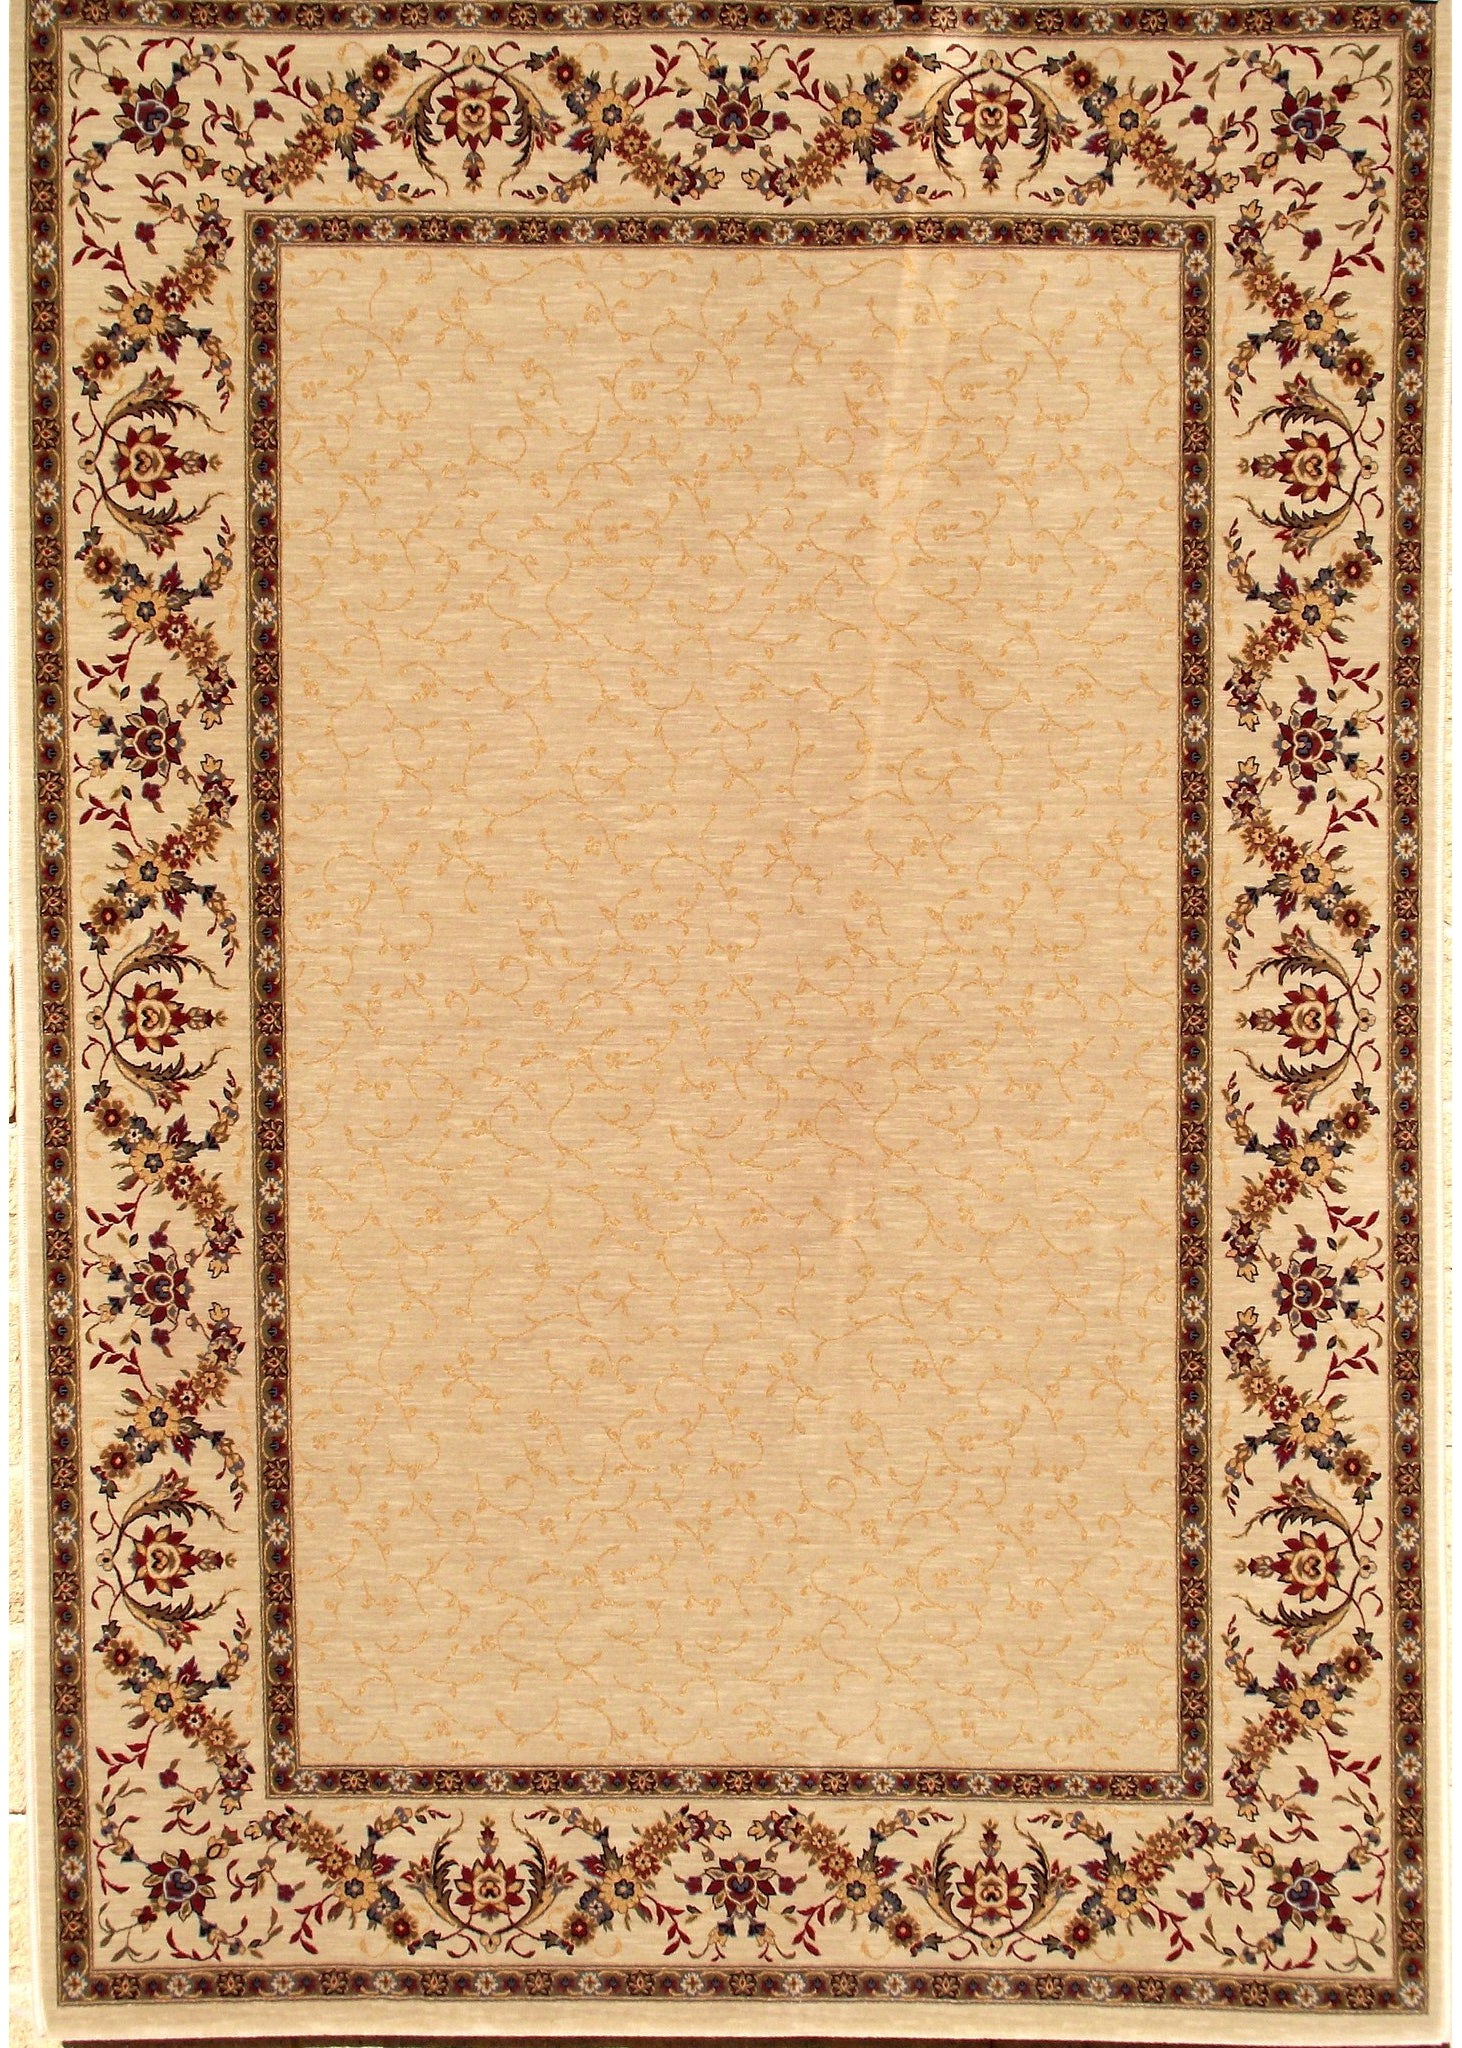 Area rug for living space and any room. Floor decor, rugs and carpets from Tabrizi Rugs. Kenouz 170 - 5'3